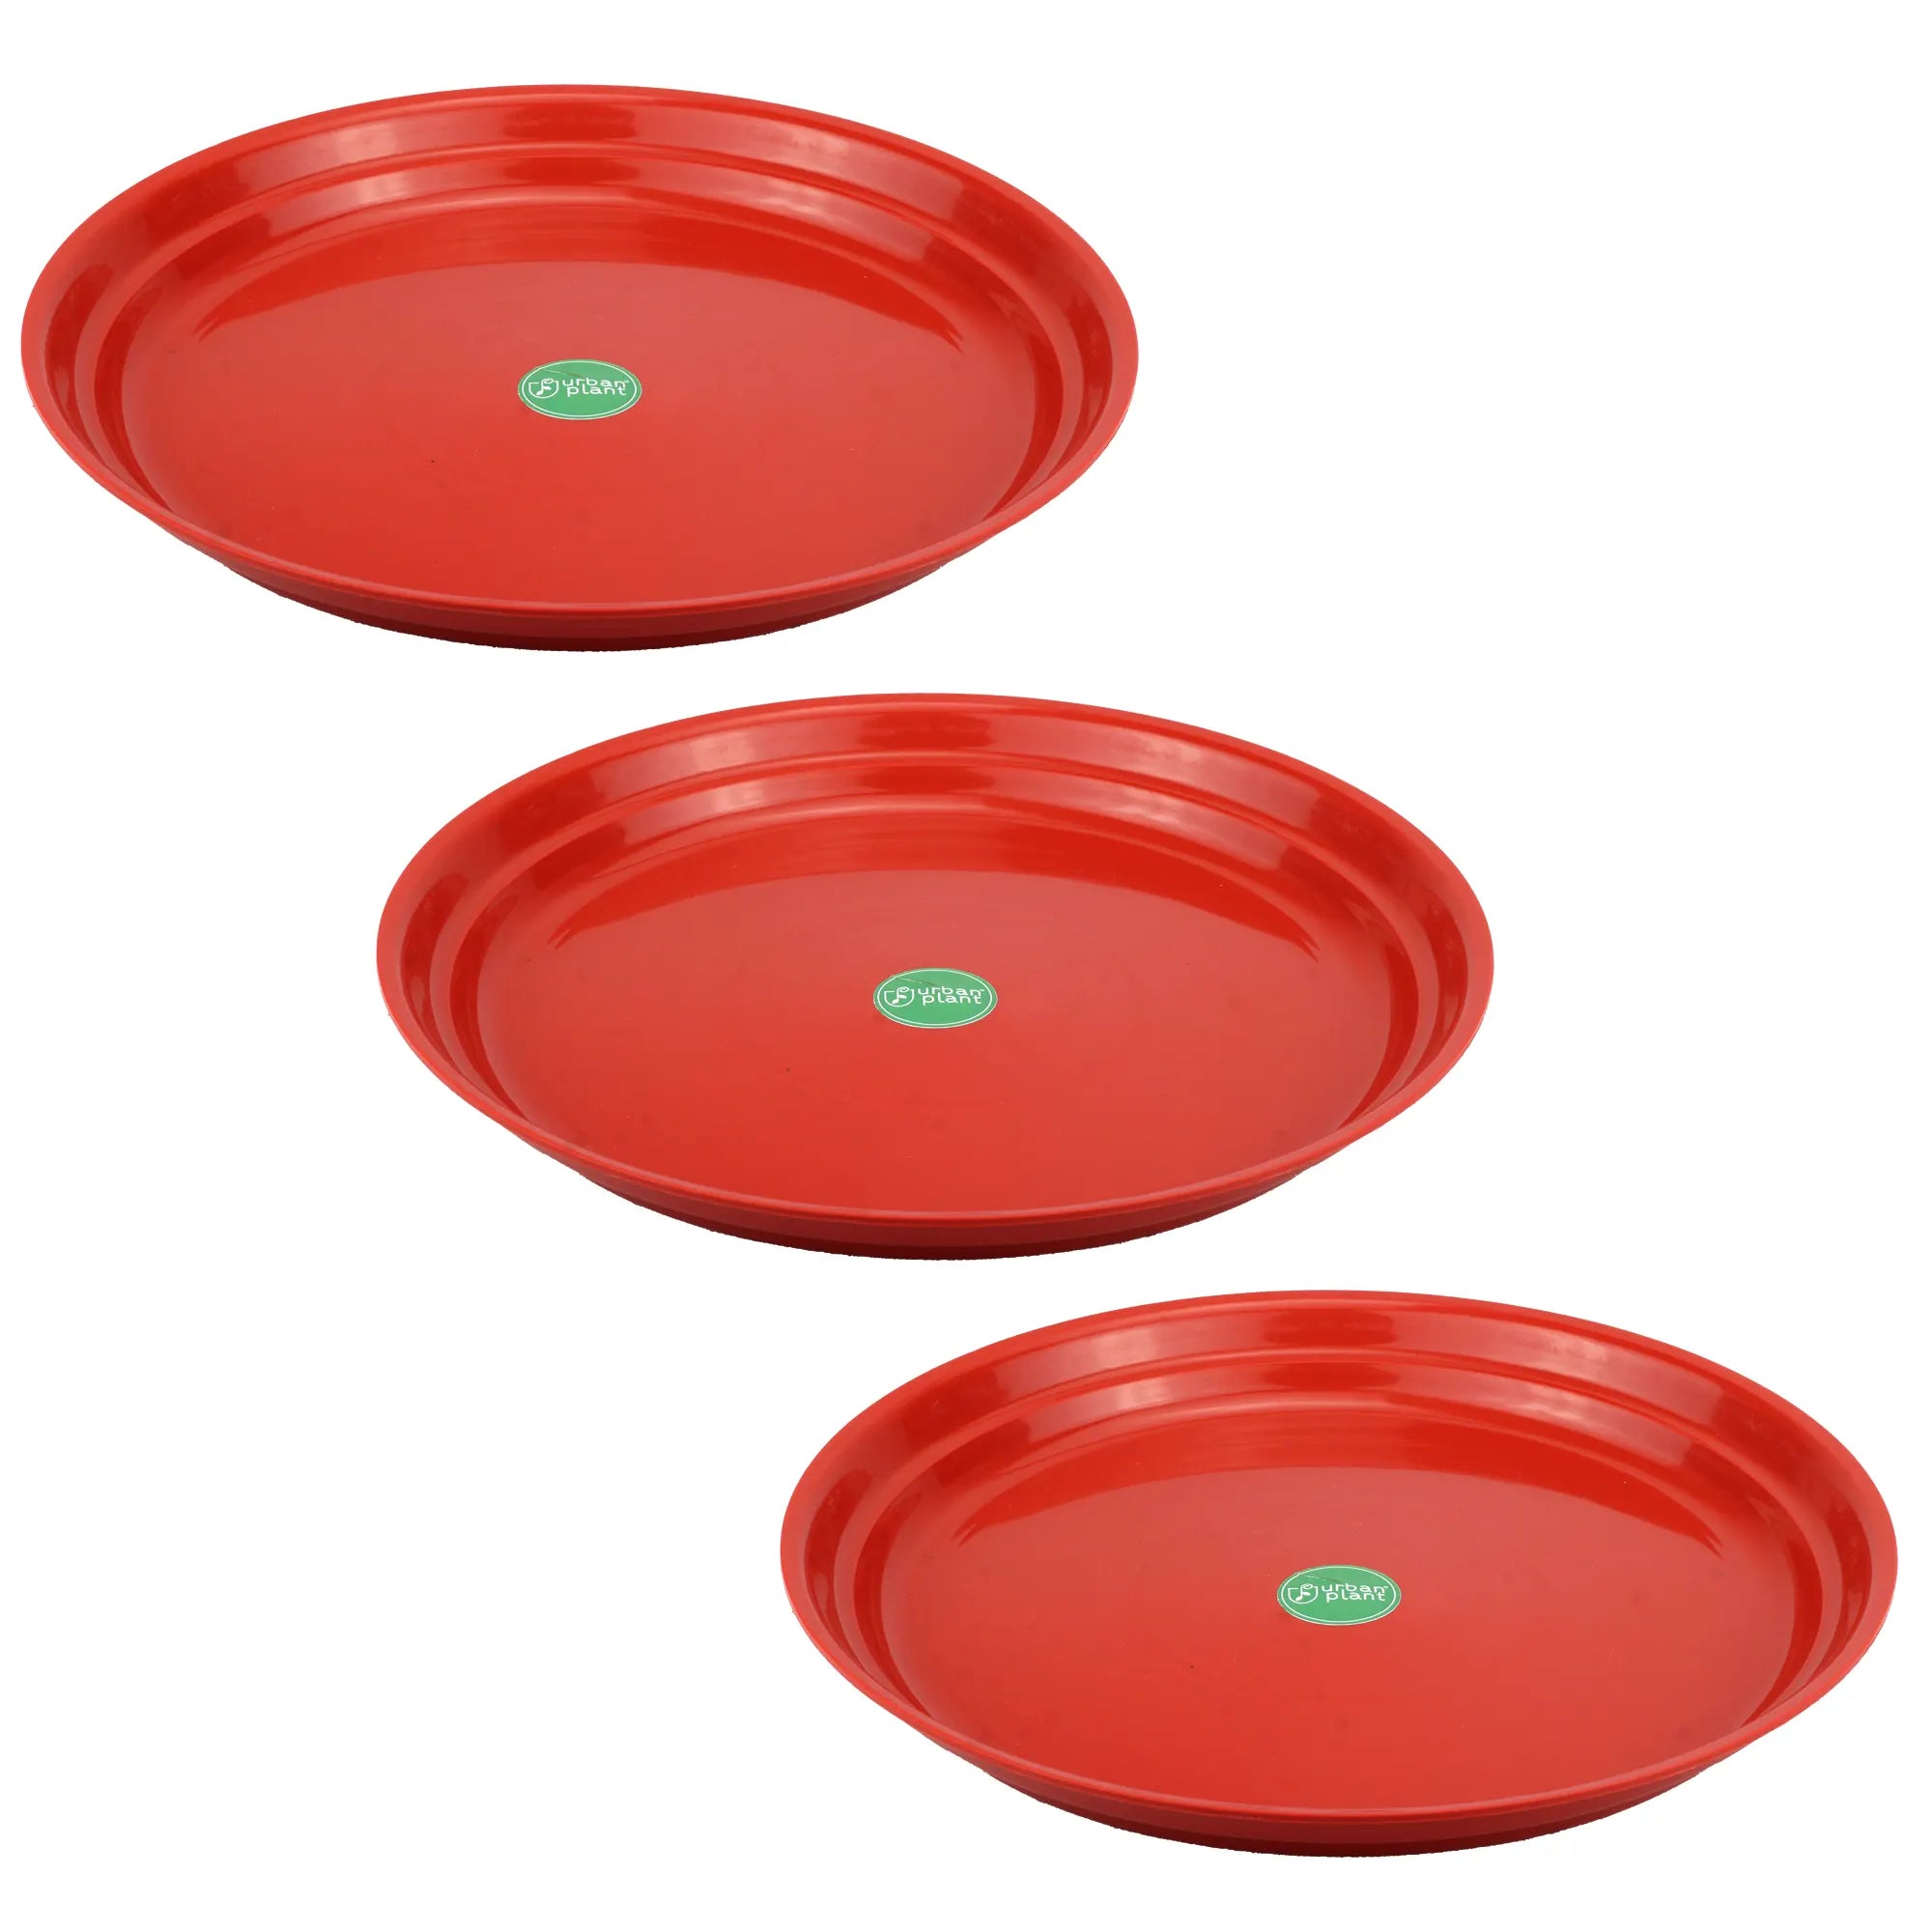 Urban Plant Round Bottom Tray (Plate/Saucer) for All Type of Pots Urban Plant 12 Inch Set of 3 